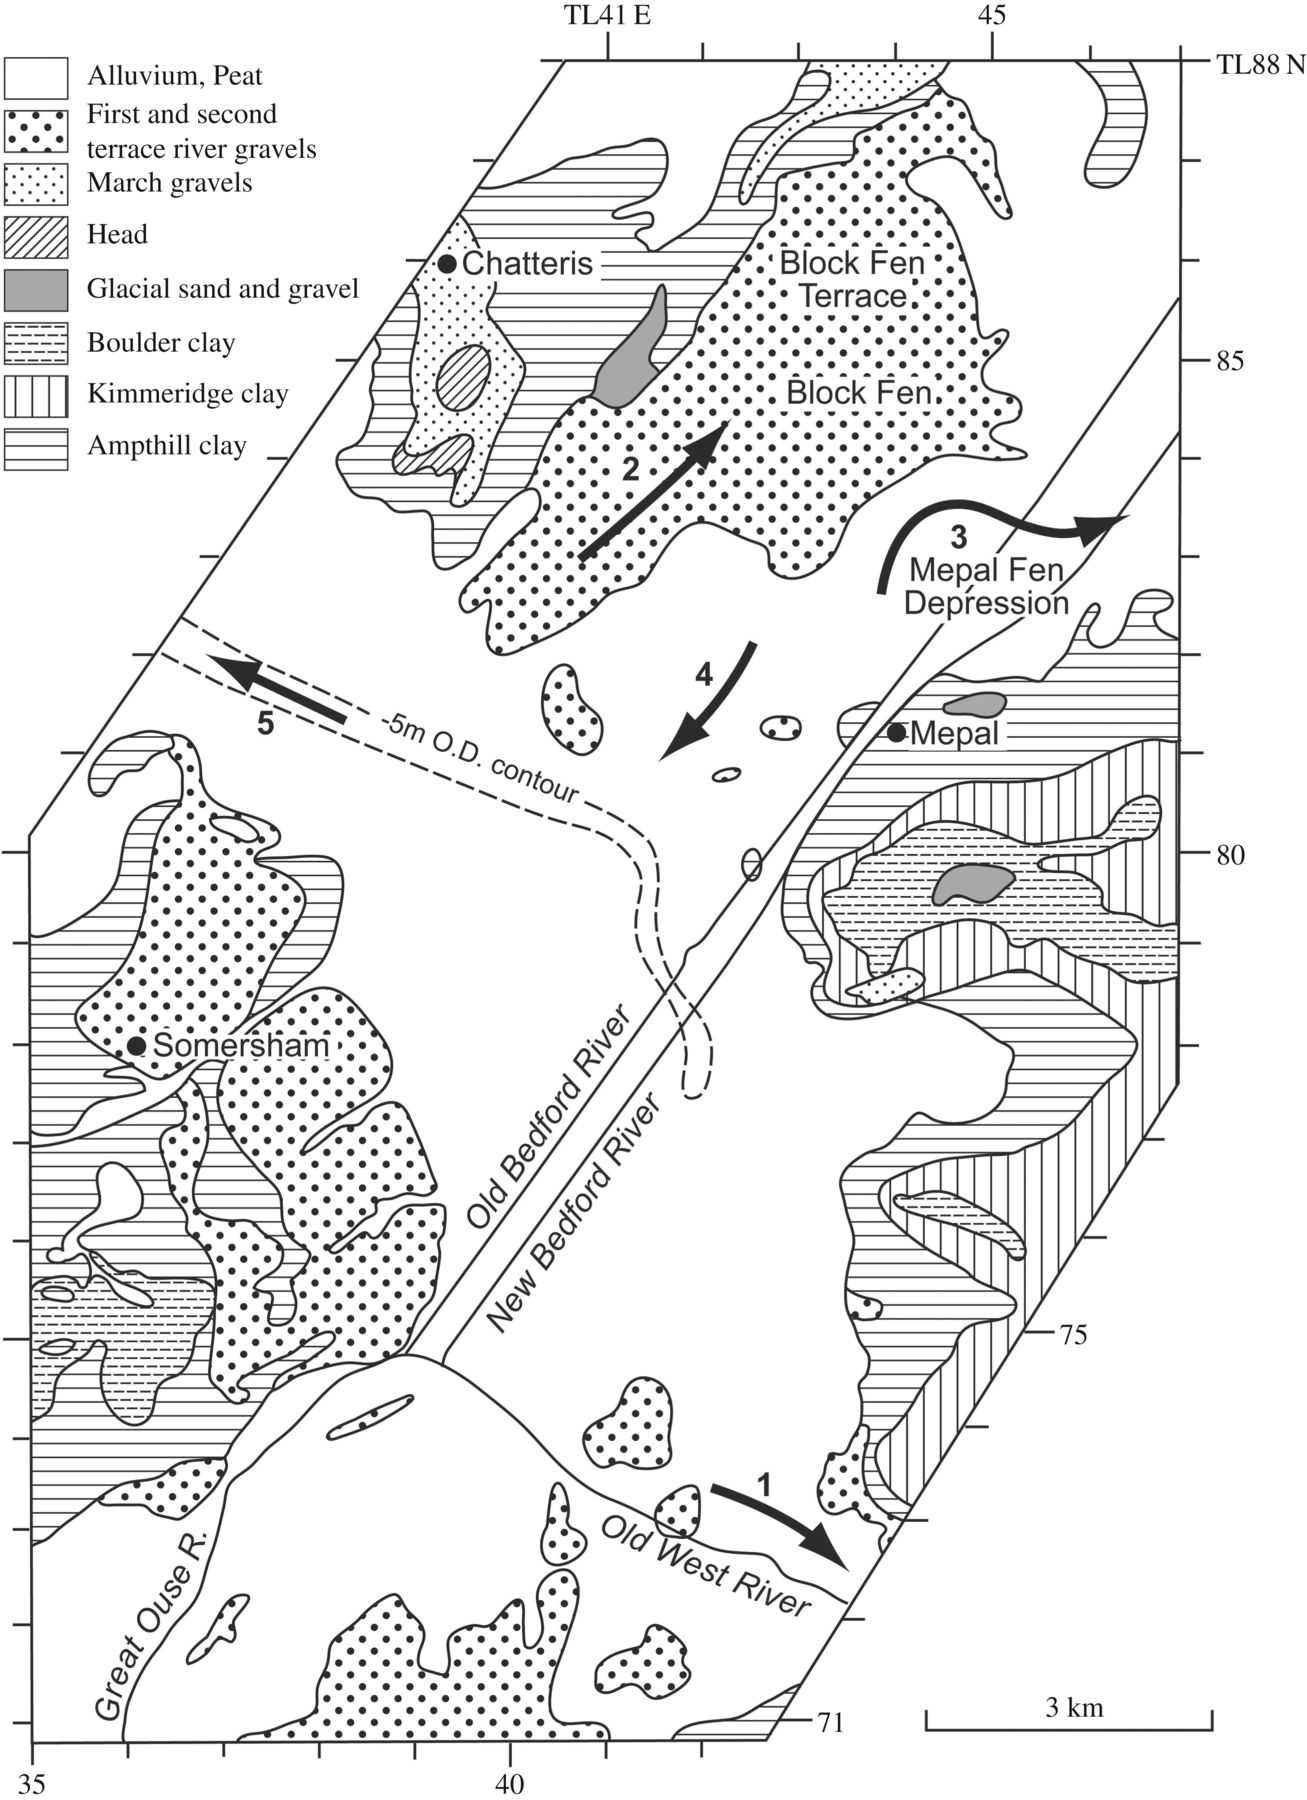 Fossils and Relative Dating Worksheet Answers Also Pleistocene Glaciation Of Fenland